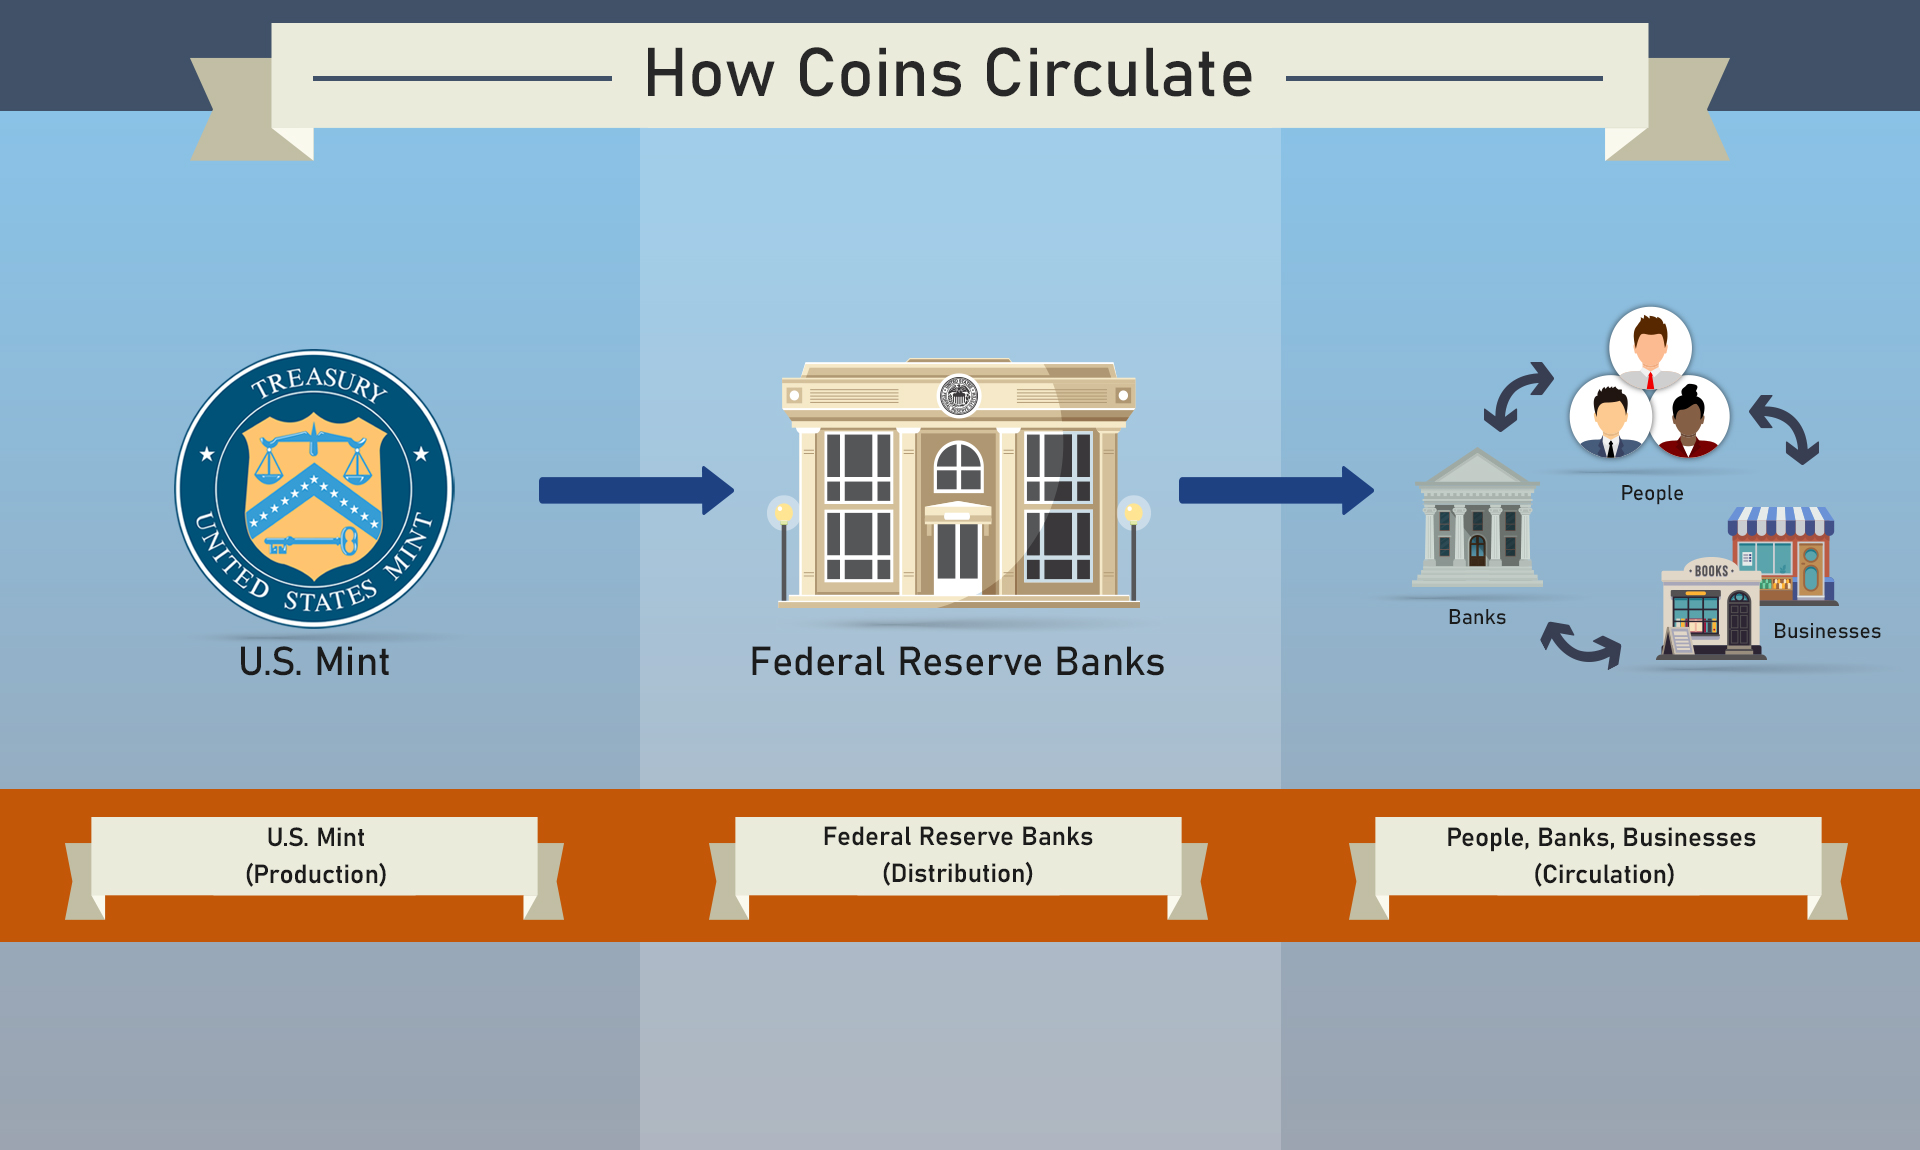 Three panels show how coins circulate throughout the economy. First, the U.S. Mint is responsible for the production of coins. Second, coins are sent to Federal Reserve Banks for distribution. Finally, coins are sent to community banks for circulation among people, businesses, and other community banks.